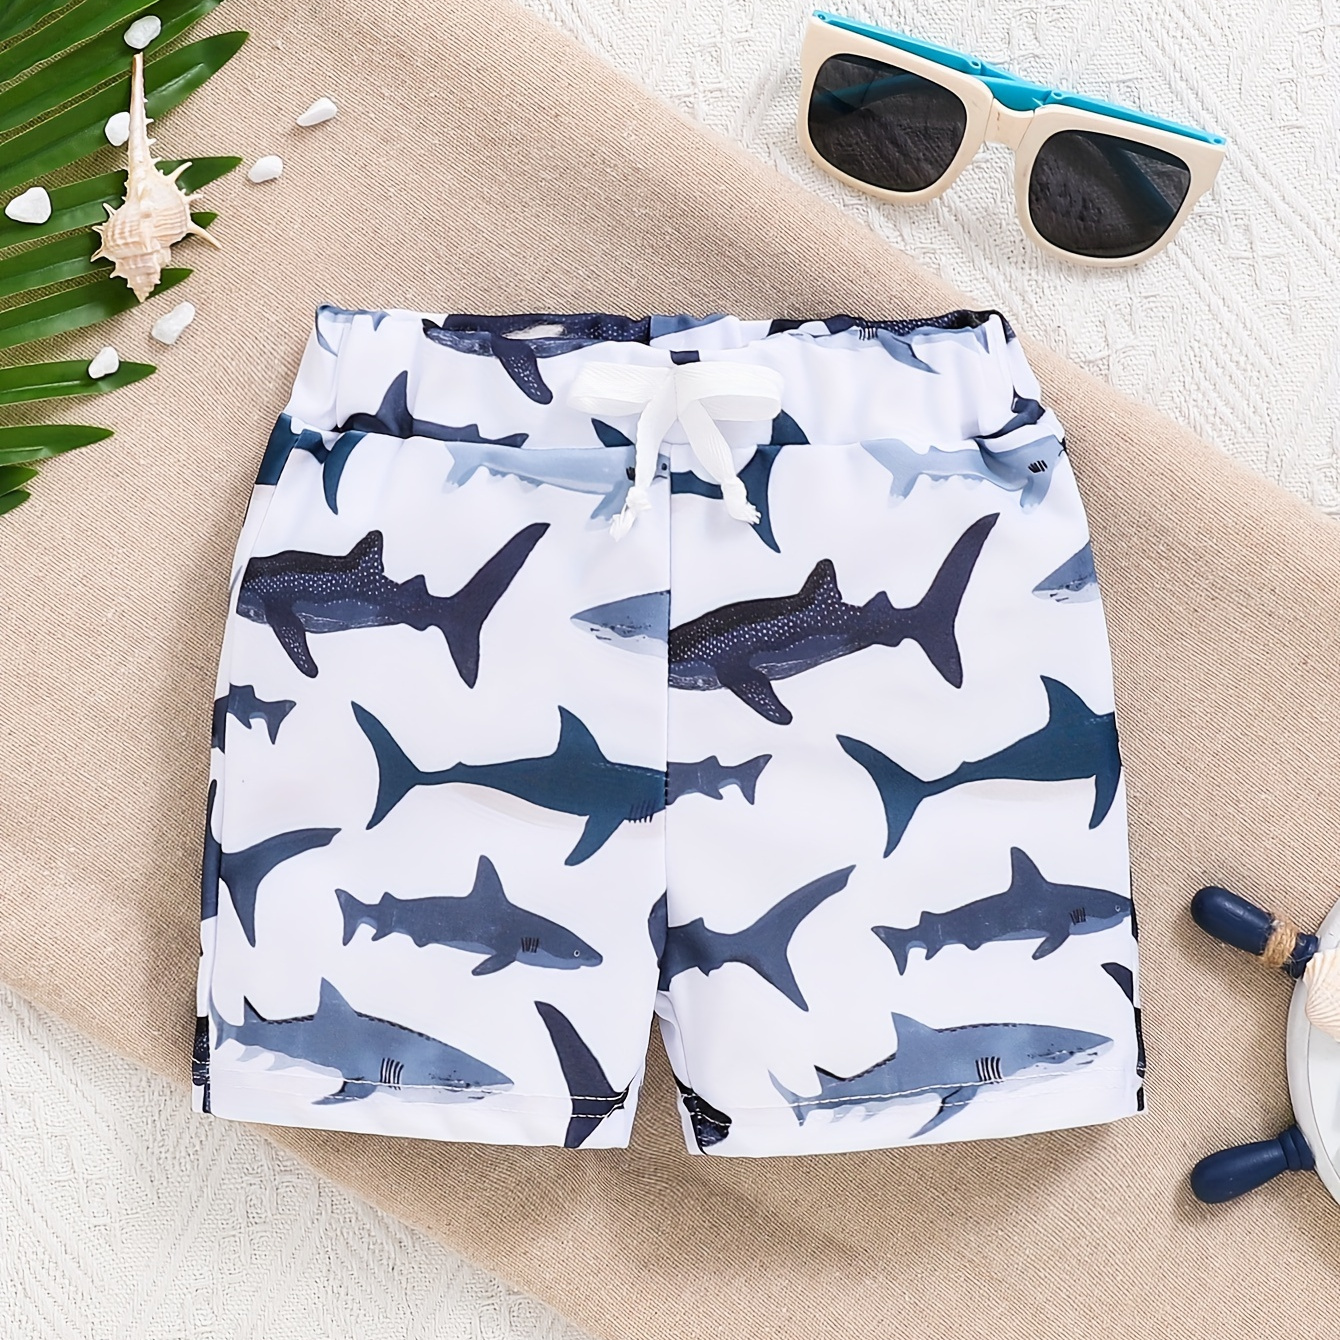 

Infant Baby Boy's Leisure Beach Swim Trunks With Shark Print For Vacation